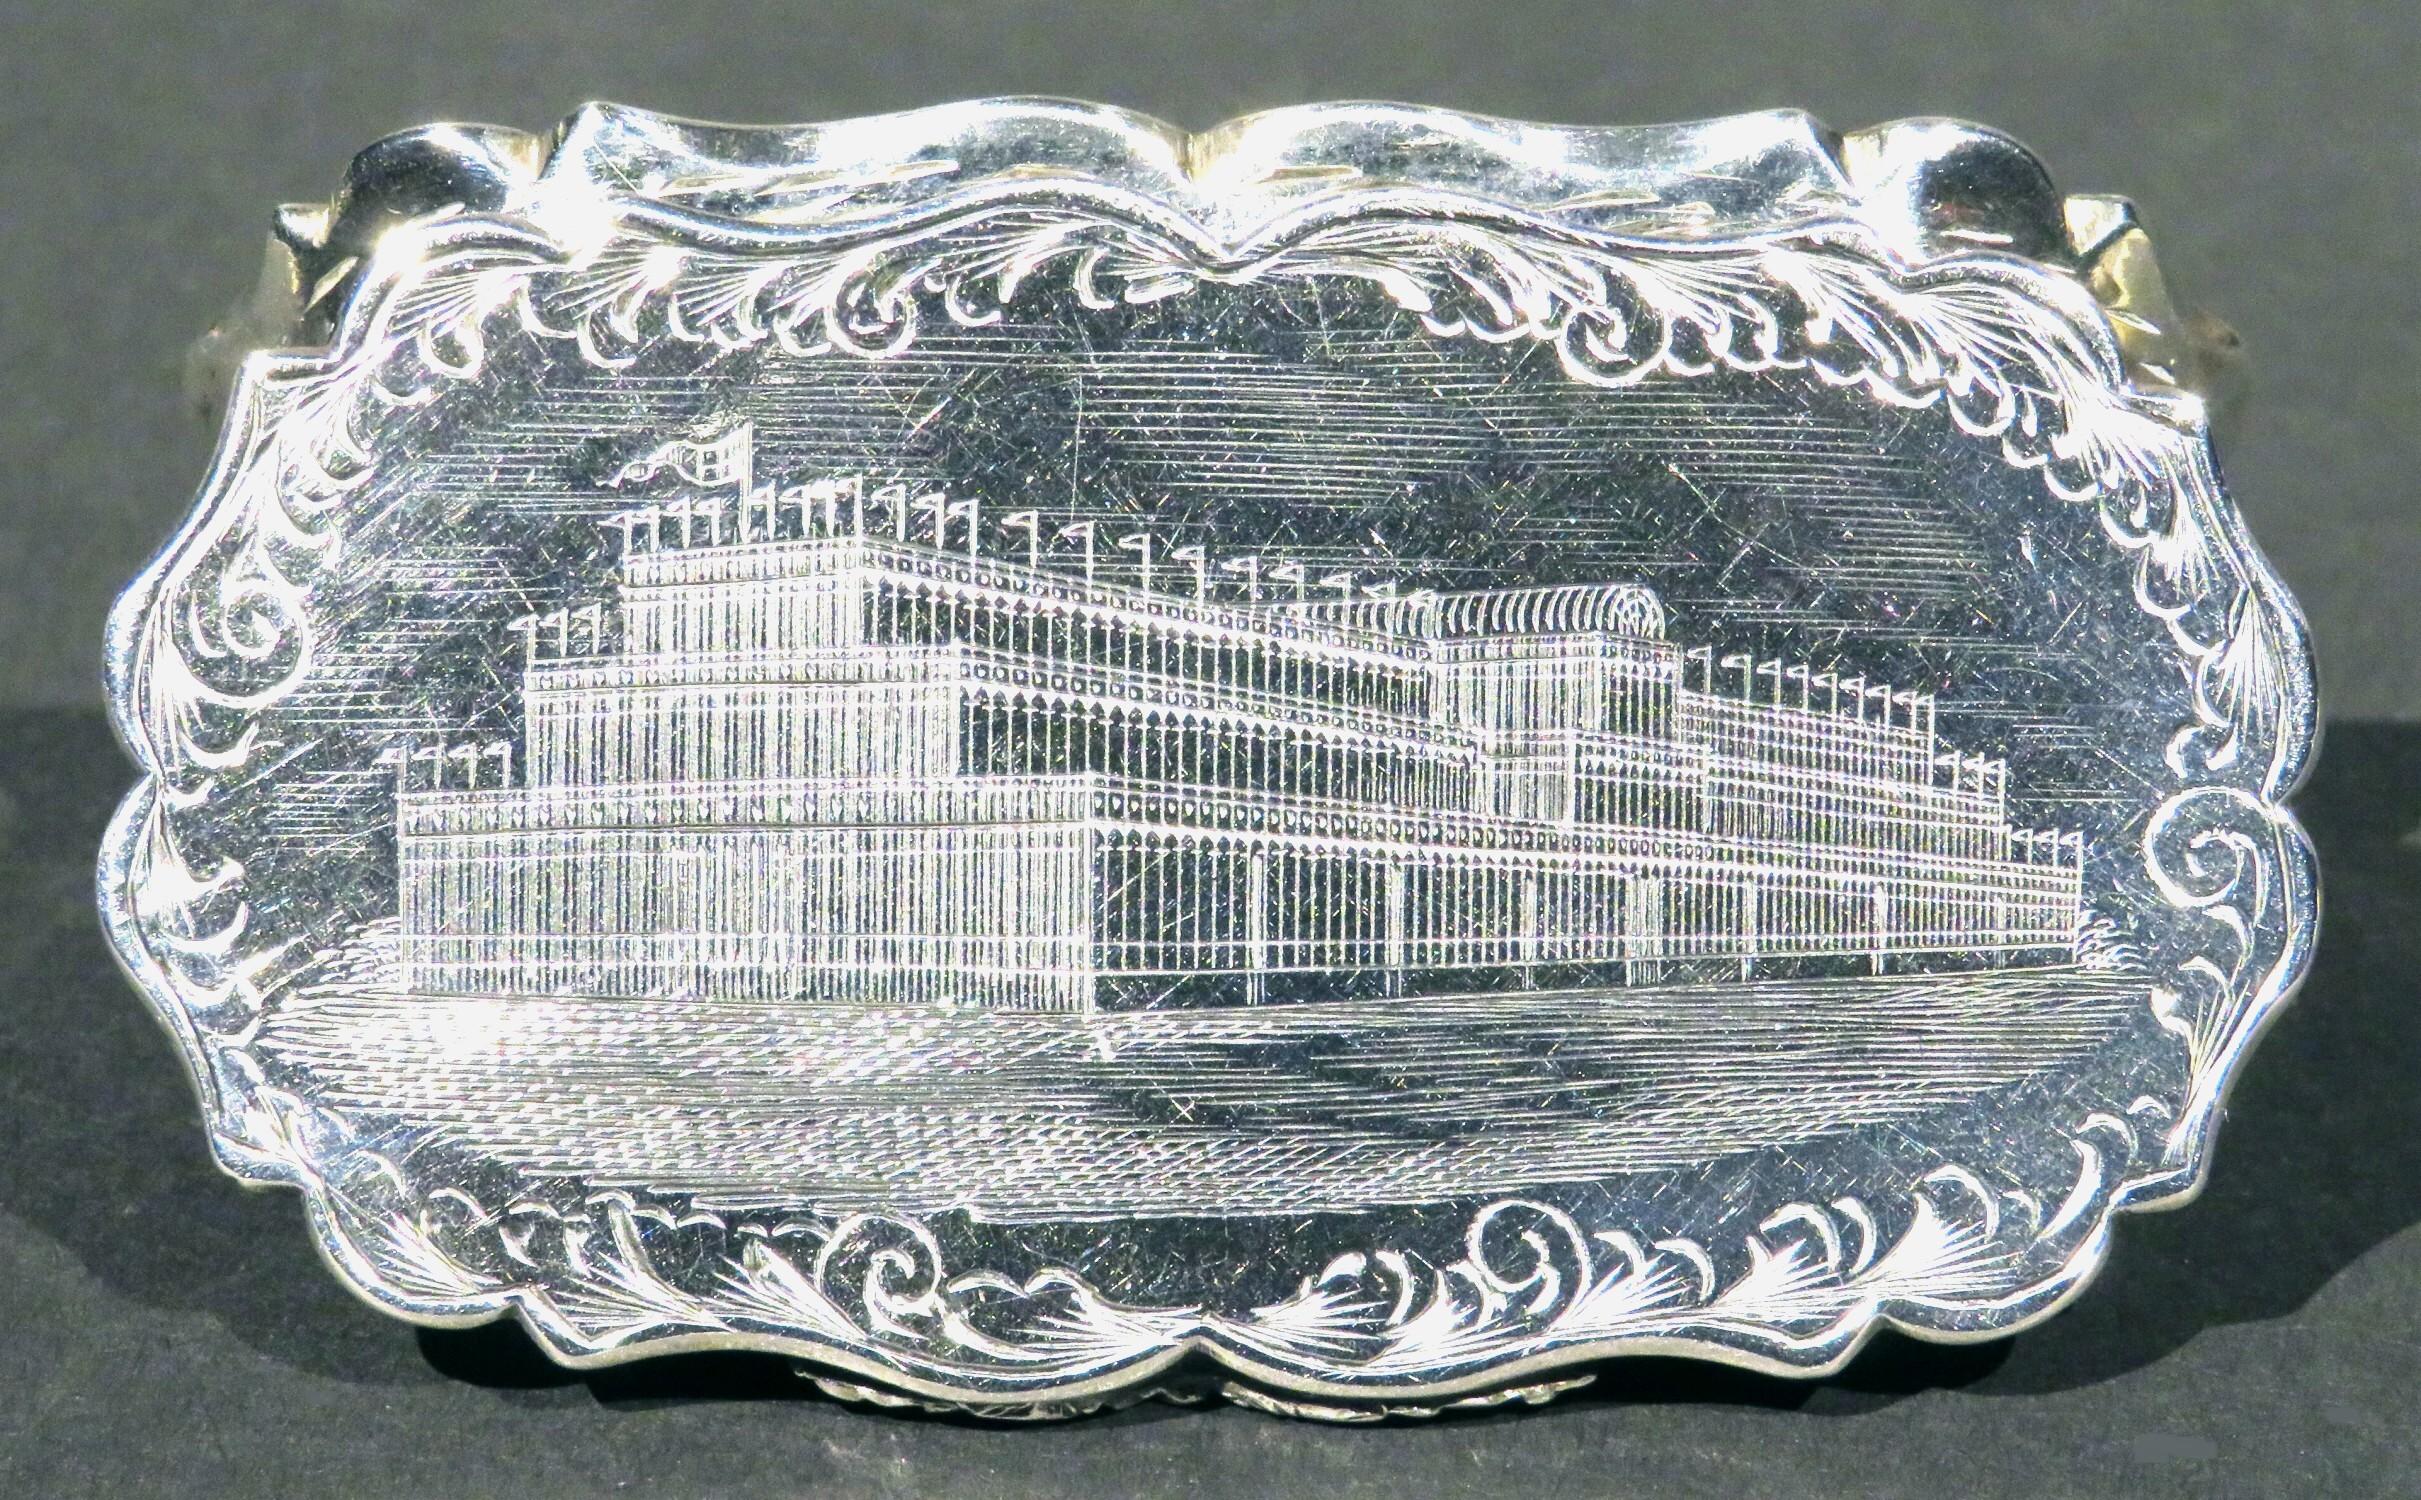 A fine and rare 19th century sterling silver snuff box made specifically for the Great Exhibition of 1851, held at the Crystal Palace in London. 
The lid shows a finely detailed engraved image of the Crystal Palace surrounded by a border of hand